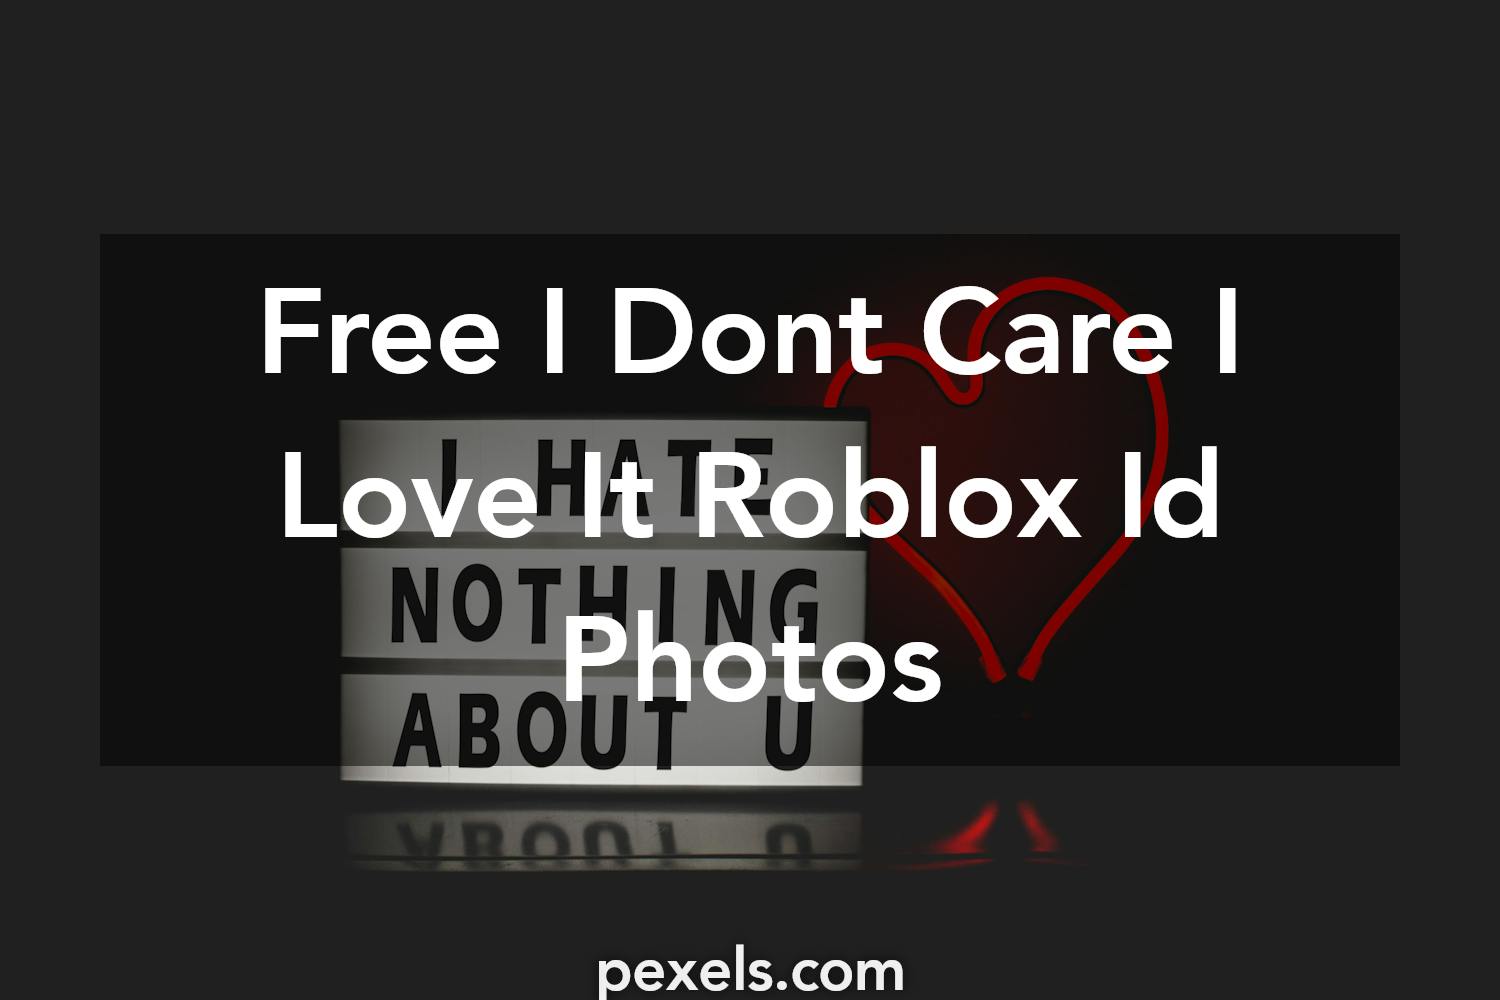 1000 Roblox Ids - old town road roblox id full version